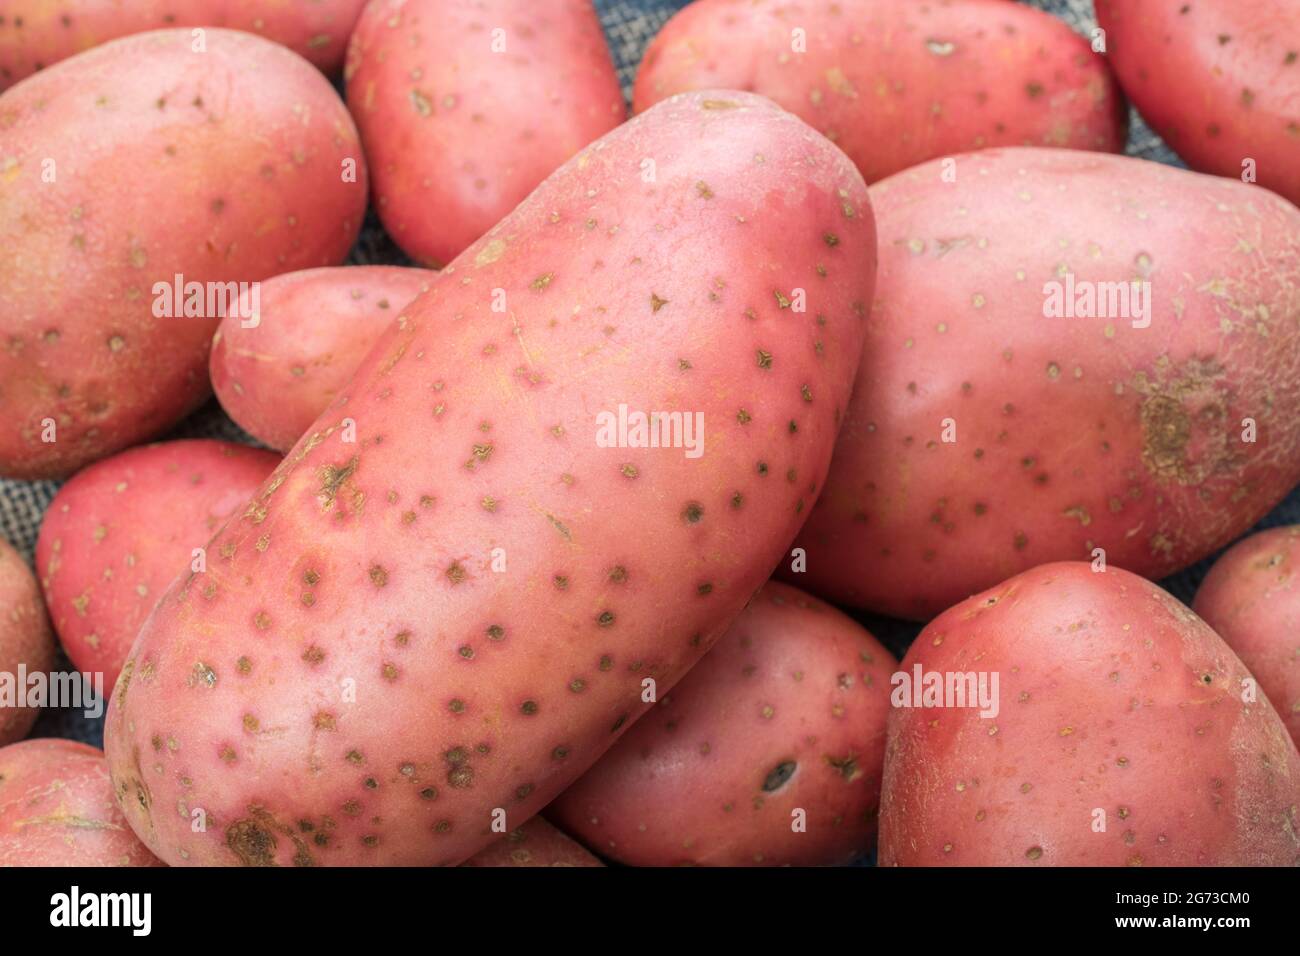 Red / russet potatoes grown in the UK. The potatoes have some disease present [which may be early stages of common scab, or perhaps powdery scab]. Stock Photo